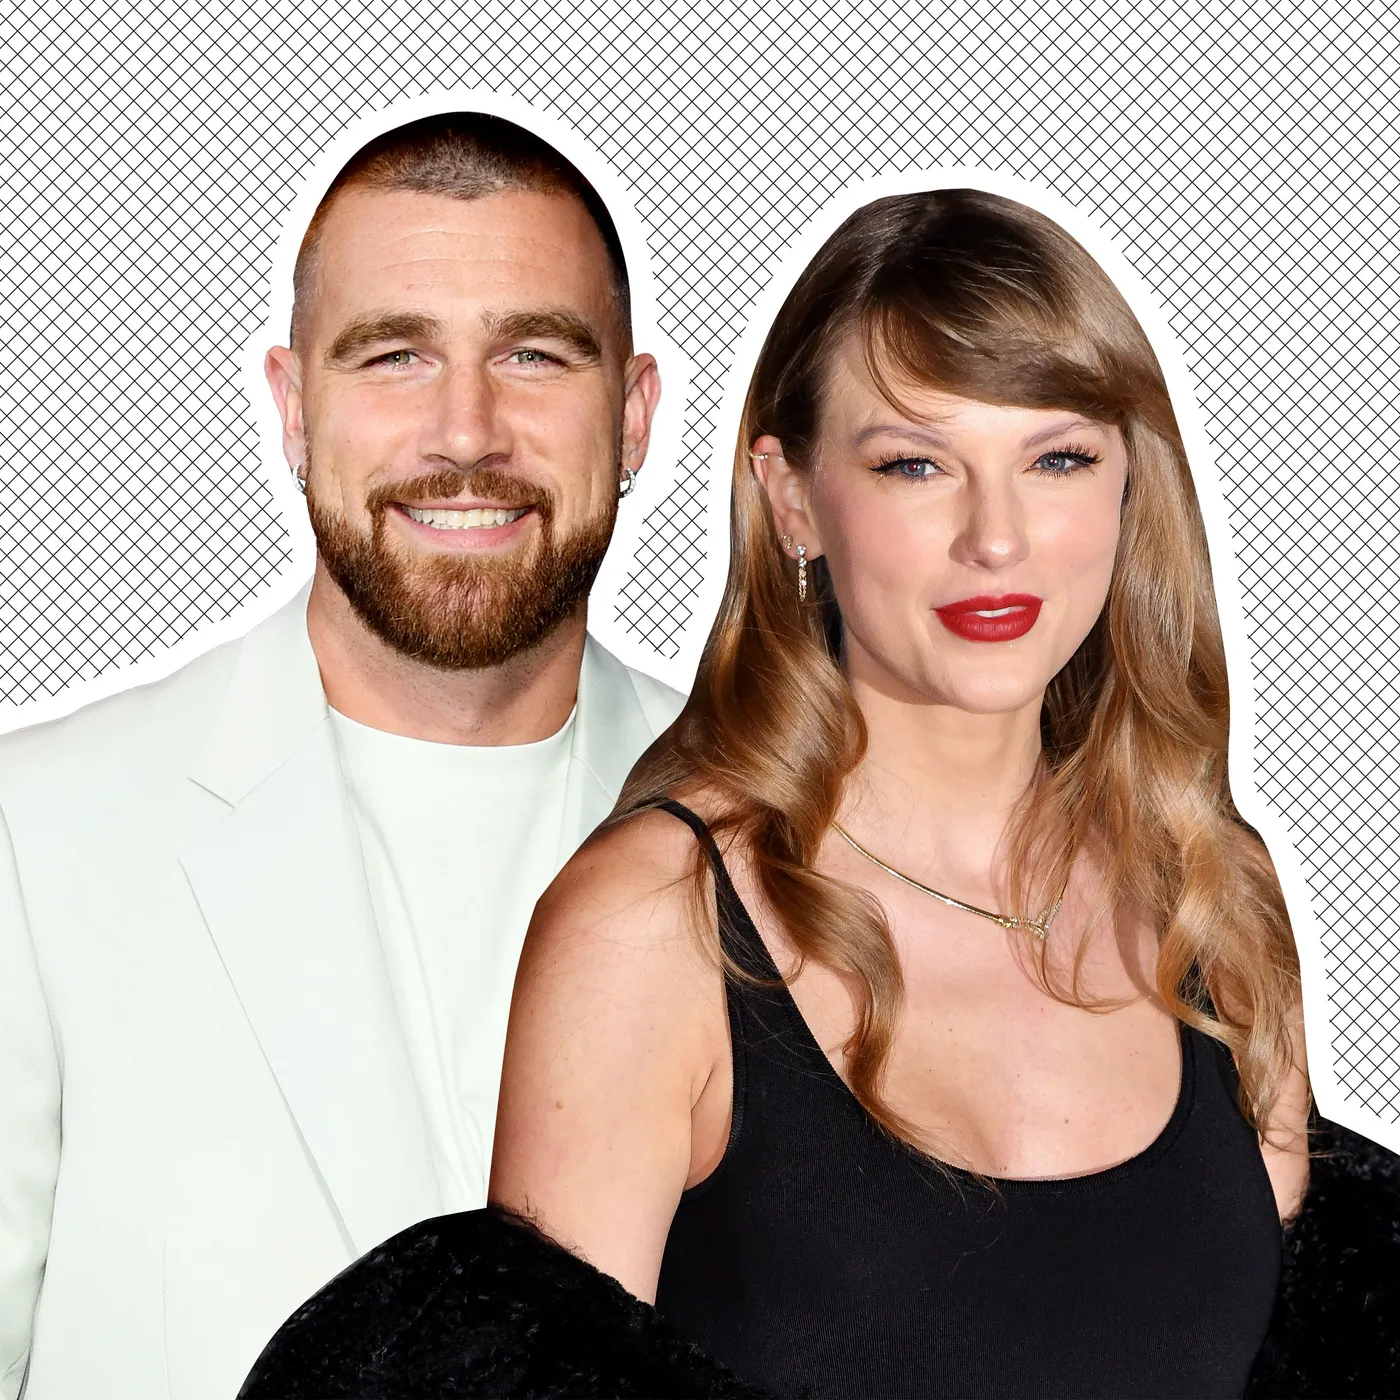 You are great  baby." Travis kelce and Taylor swift first loved up moment after the Grammy award.